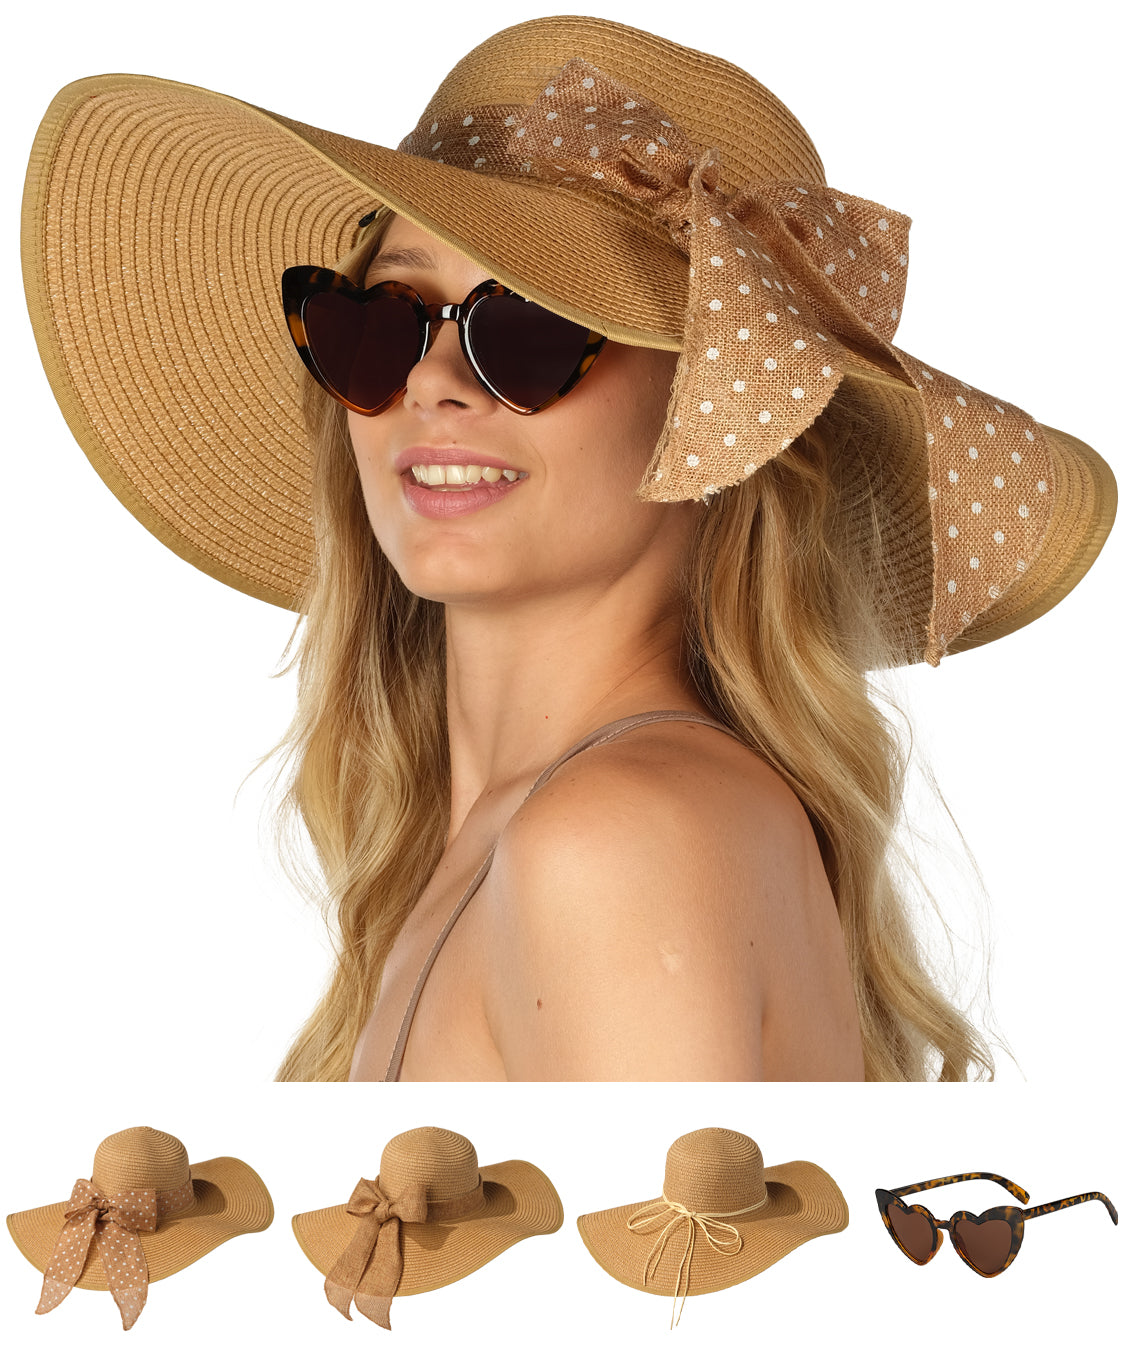 Funcredible Wide Brim Sun Hats for Women - Floppy Straw Hat with Heart Glasses